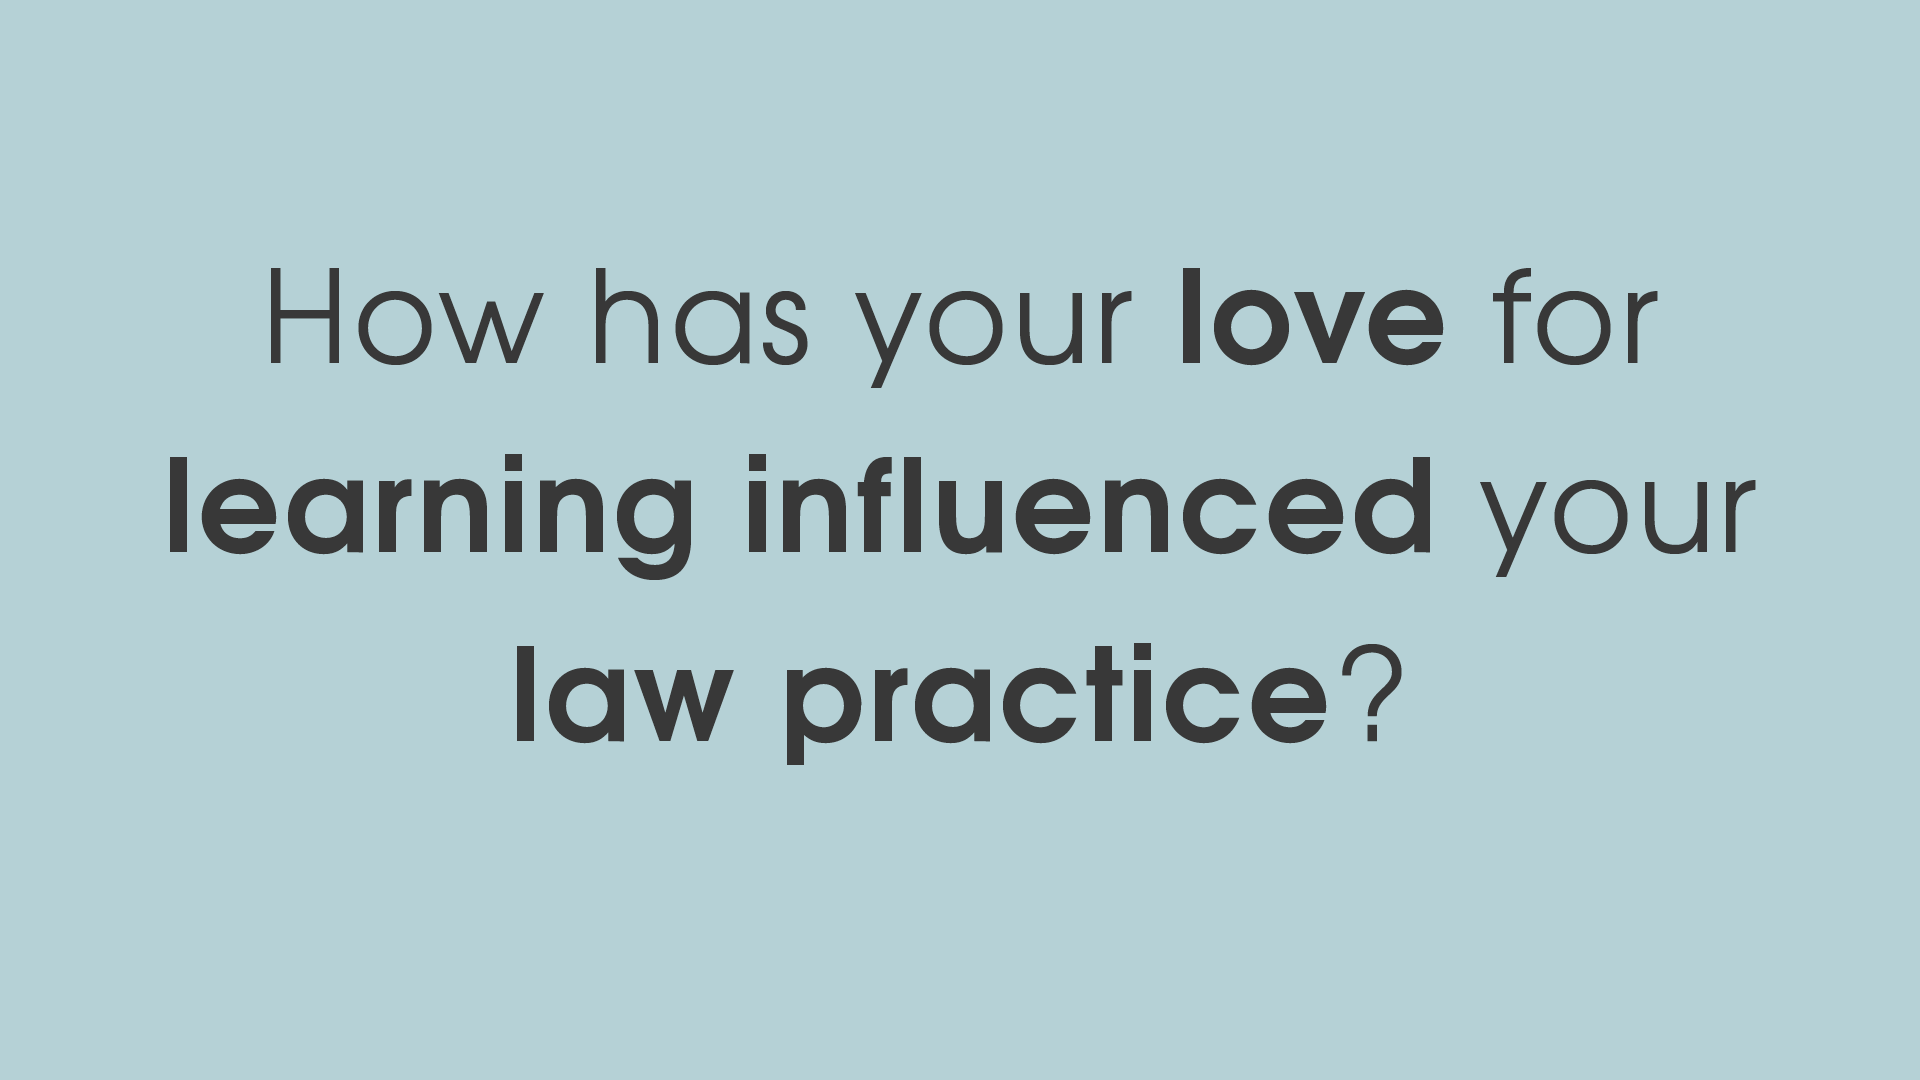 Family lawyer article video - How has your love for learning influenced your law practice?